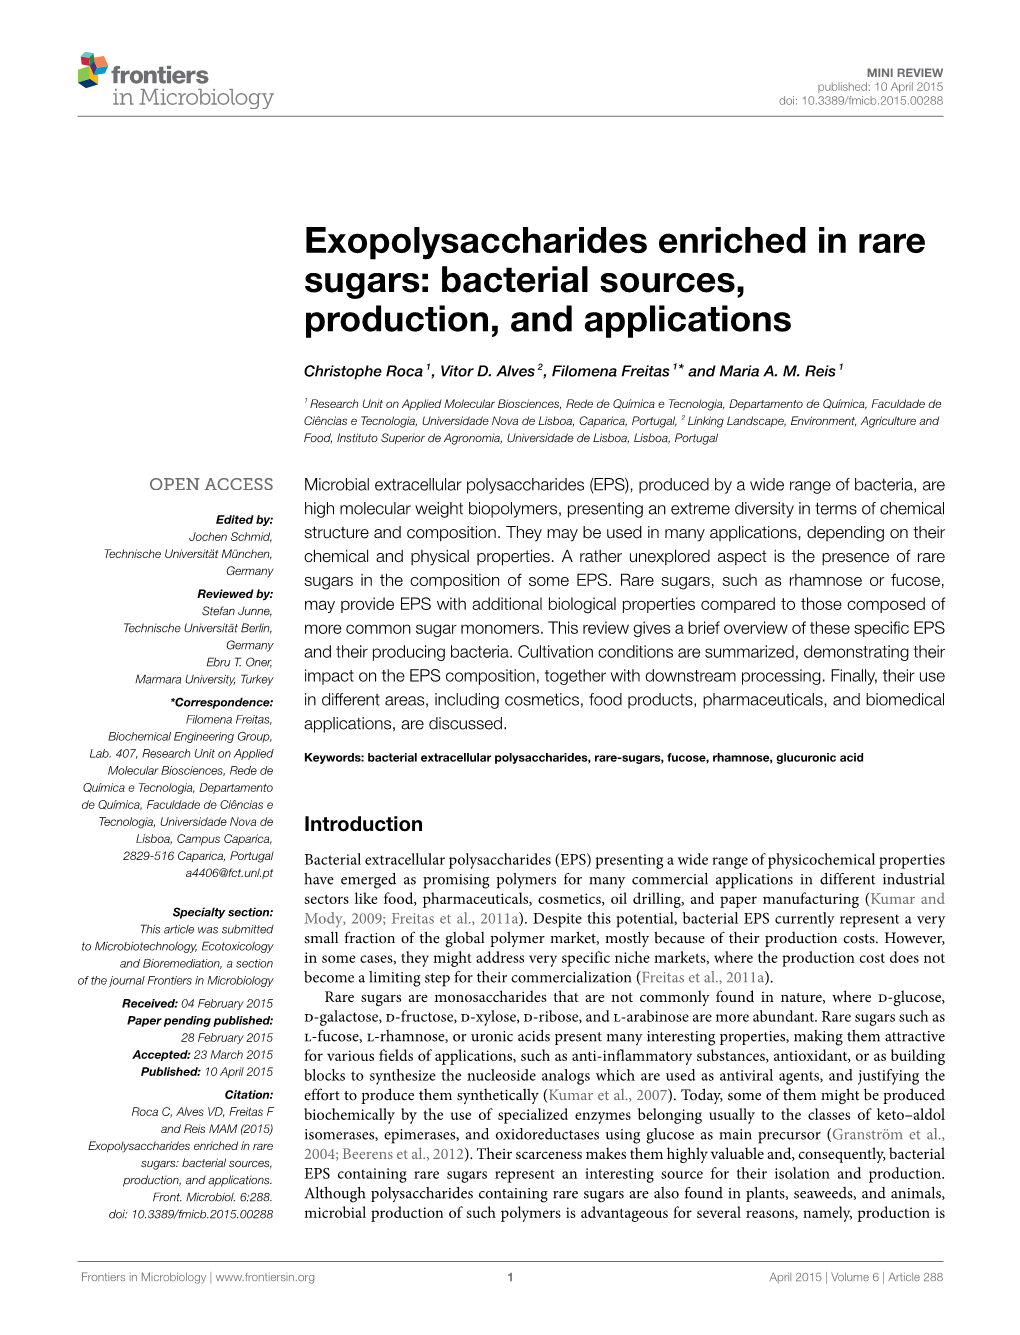 Exopolysaccharides Enriched in Rare Sugars: Bacterial Sources, Production, and Applications